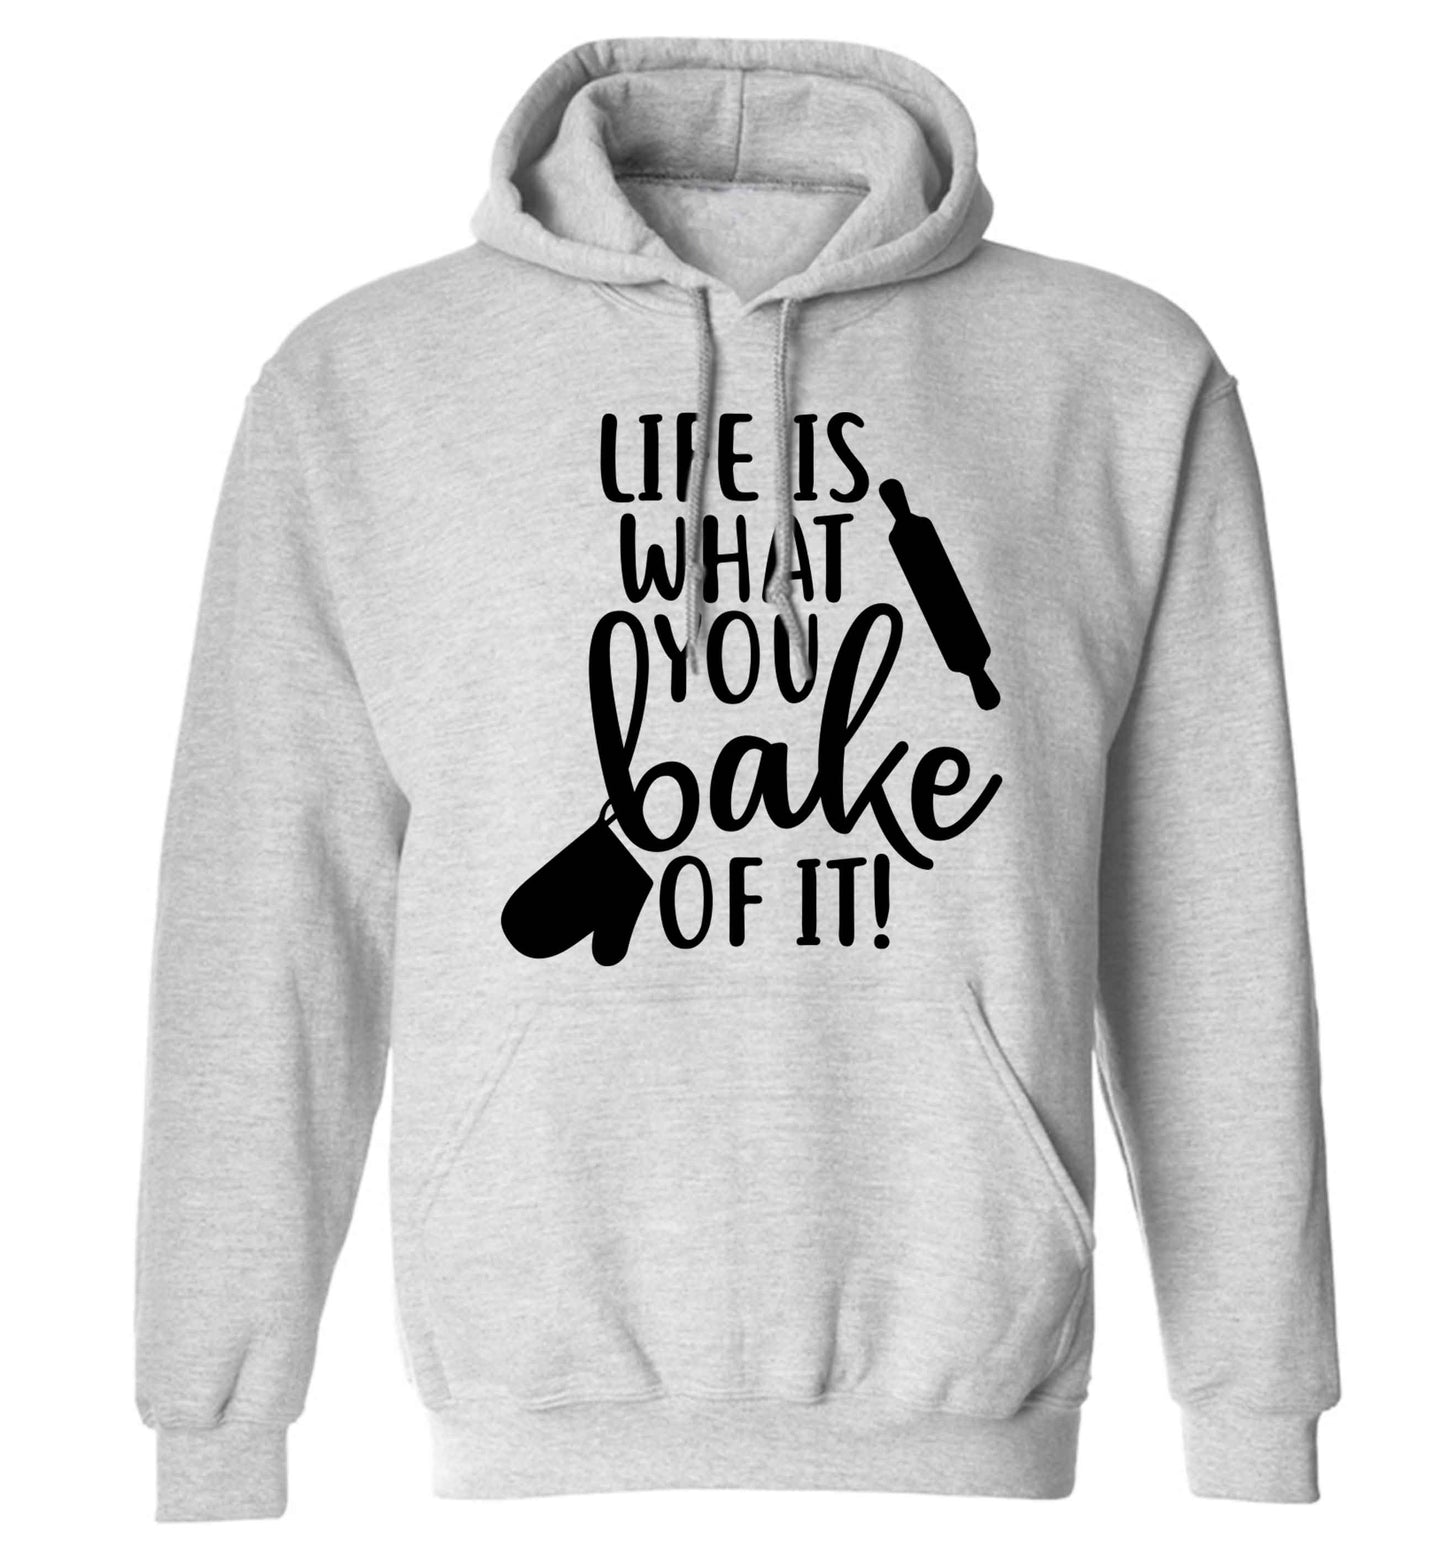 Life is what you bake of it adults unisex grey hoodie 2XL